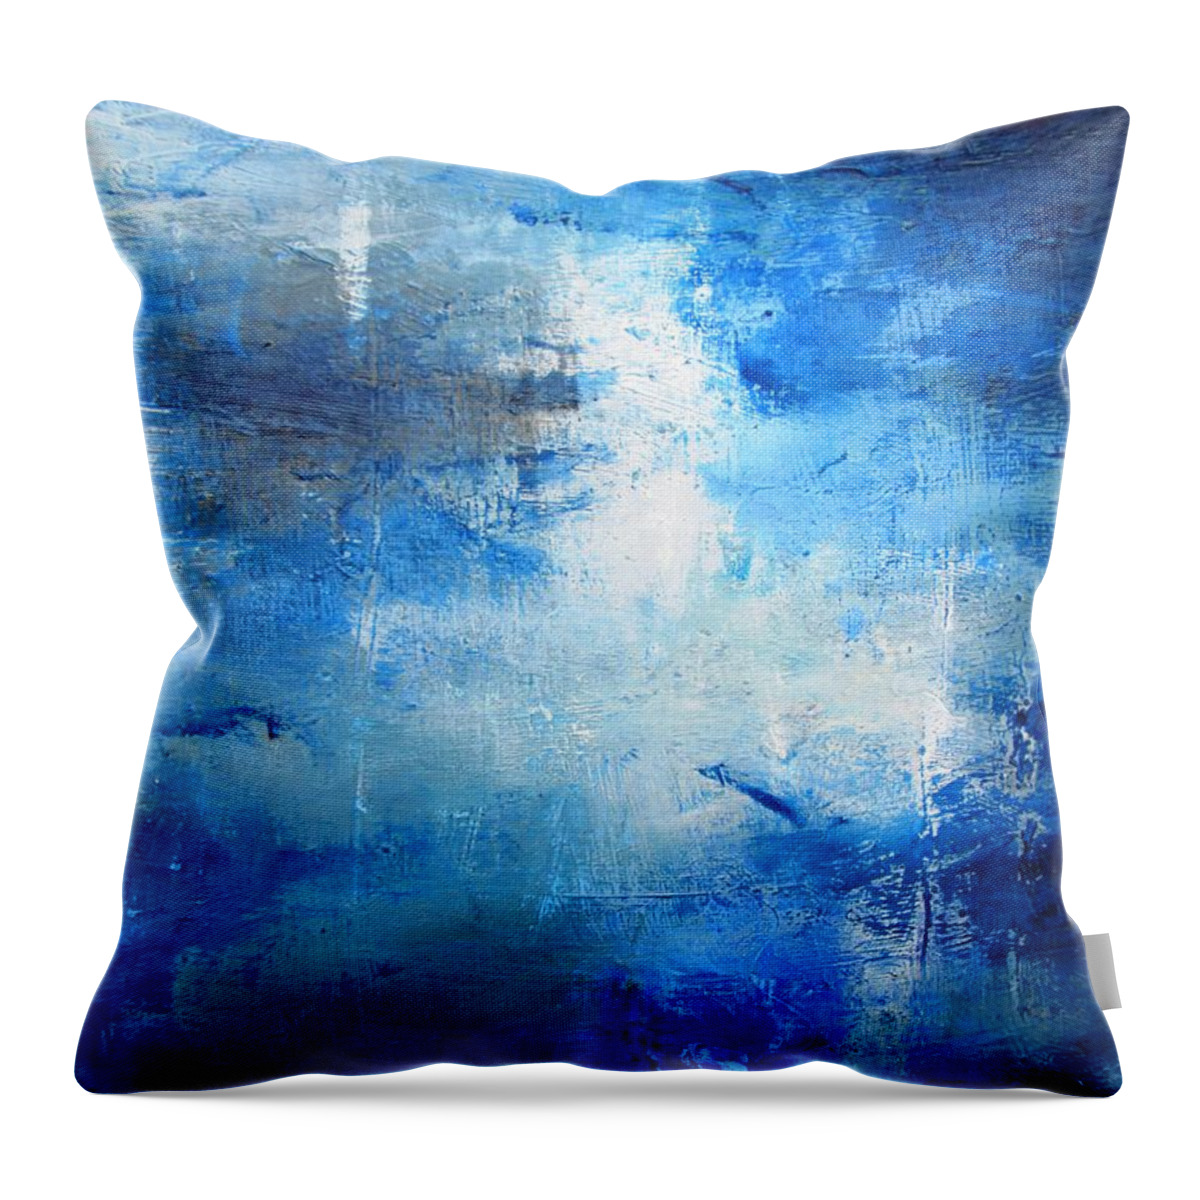 Abstract Blue And White Painting Throw Pillow featuring the painting Moonlight On Water- Abstract by Mary Cahalan Lee - aka PIXI